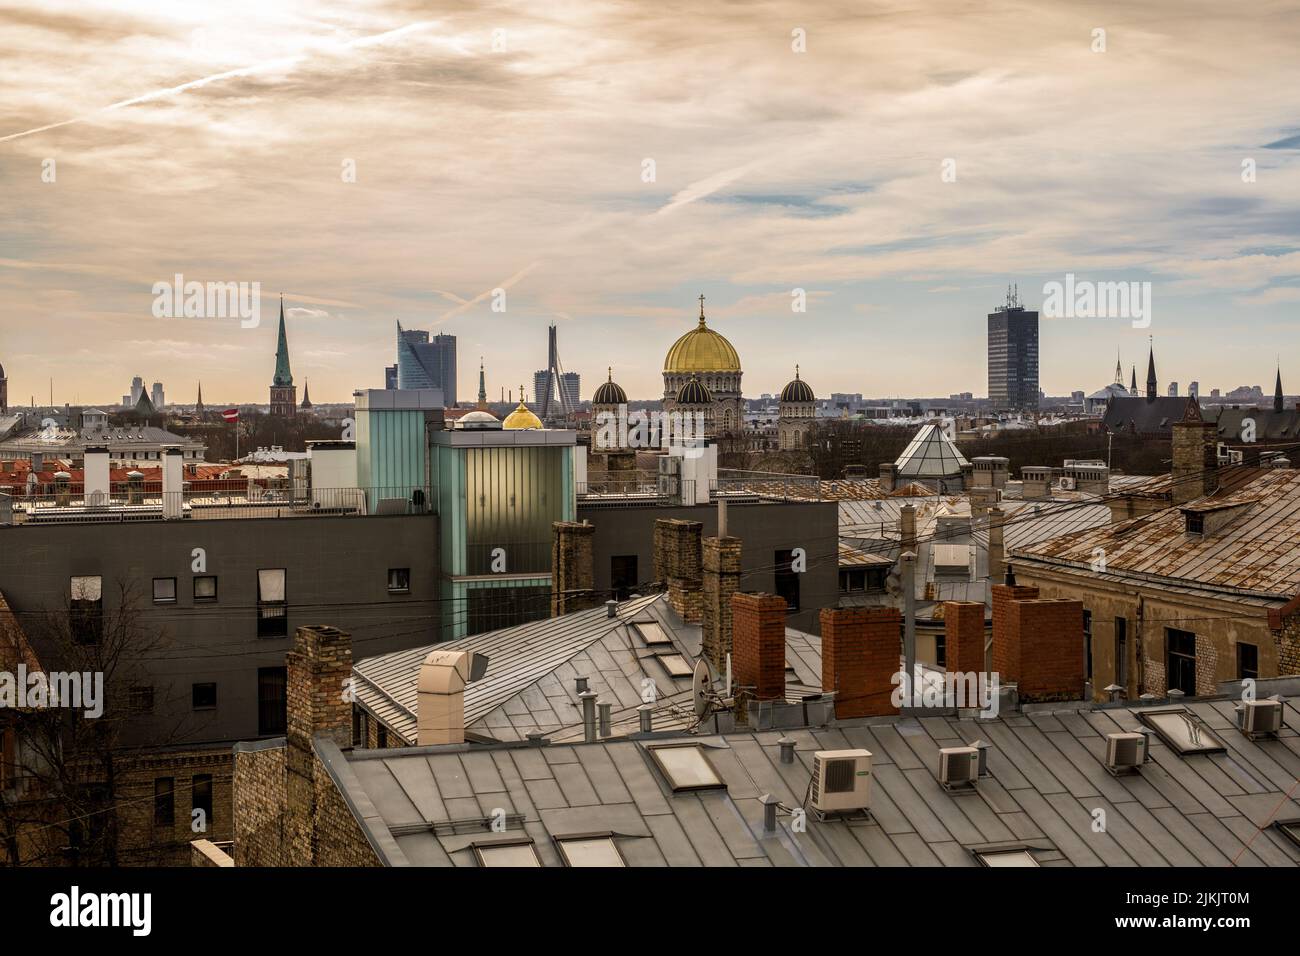 An aerial shot of the rooftops of the buildings of Kyiv on a sunny day against dusk sky, Ukraine Stock Photo